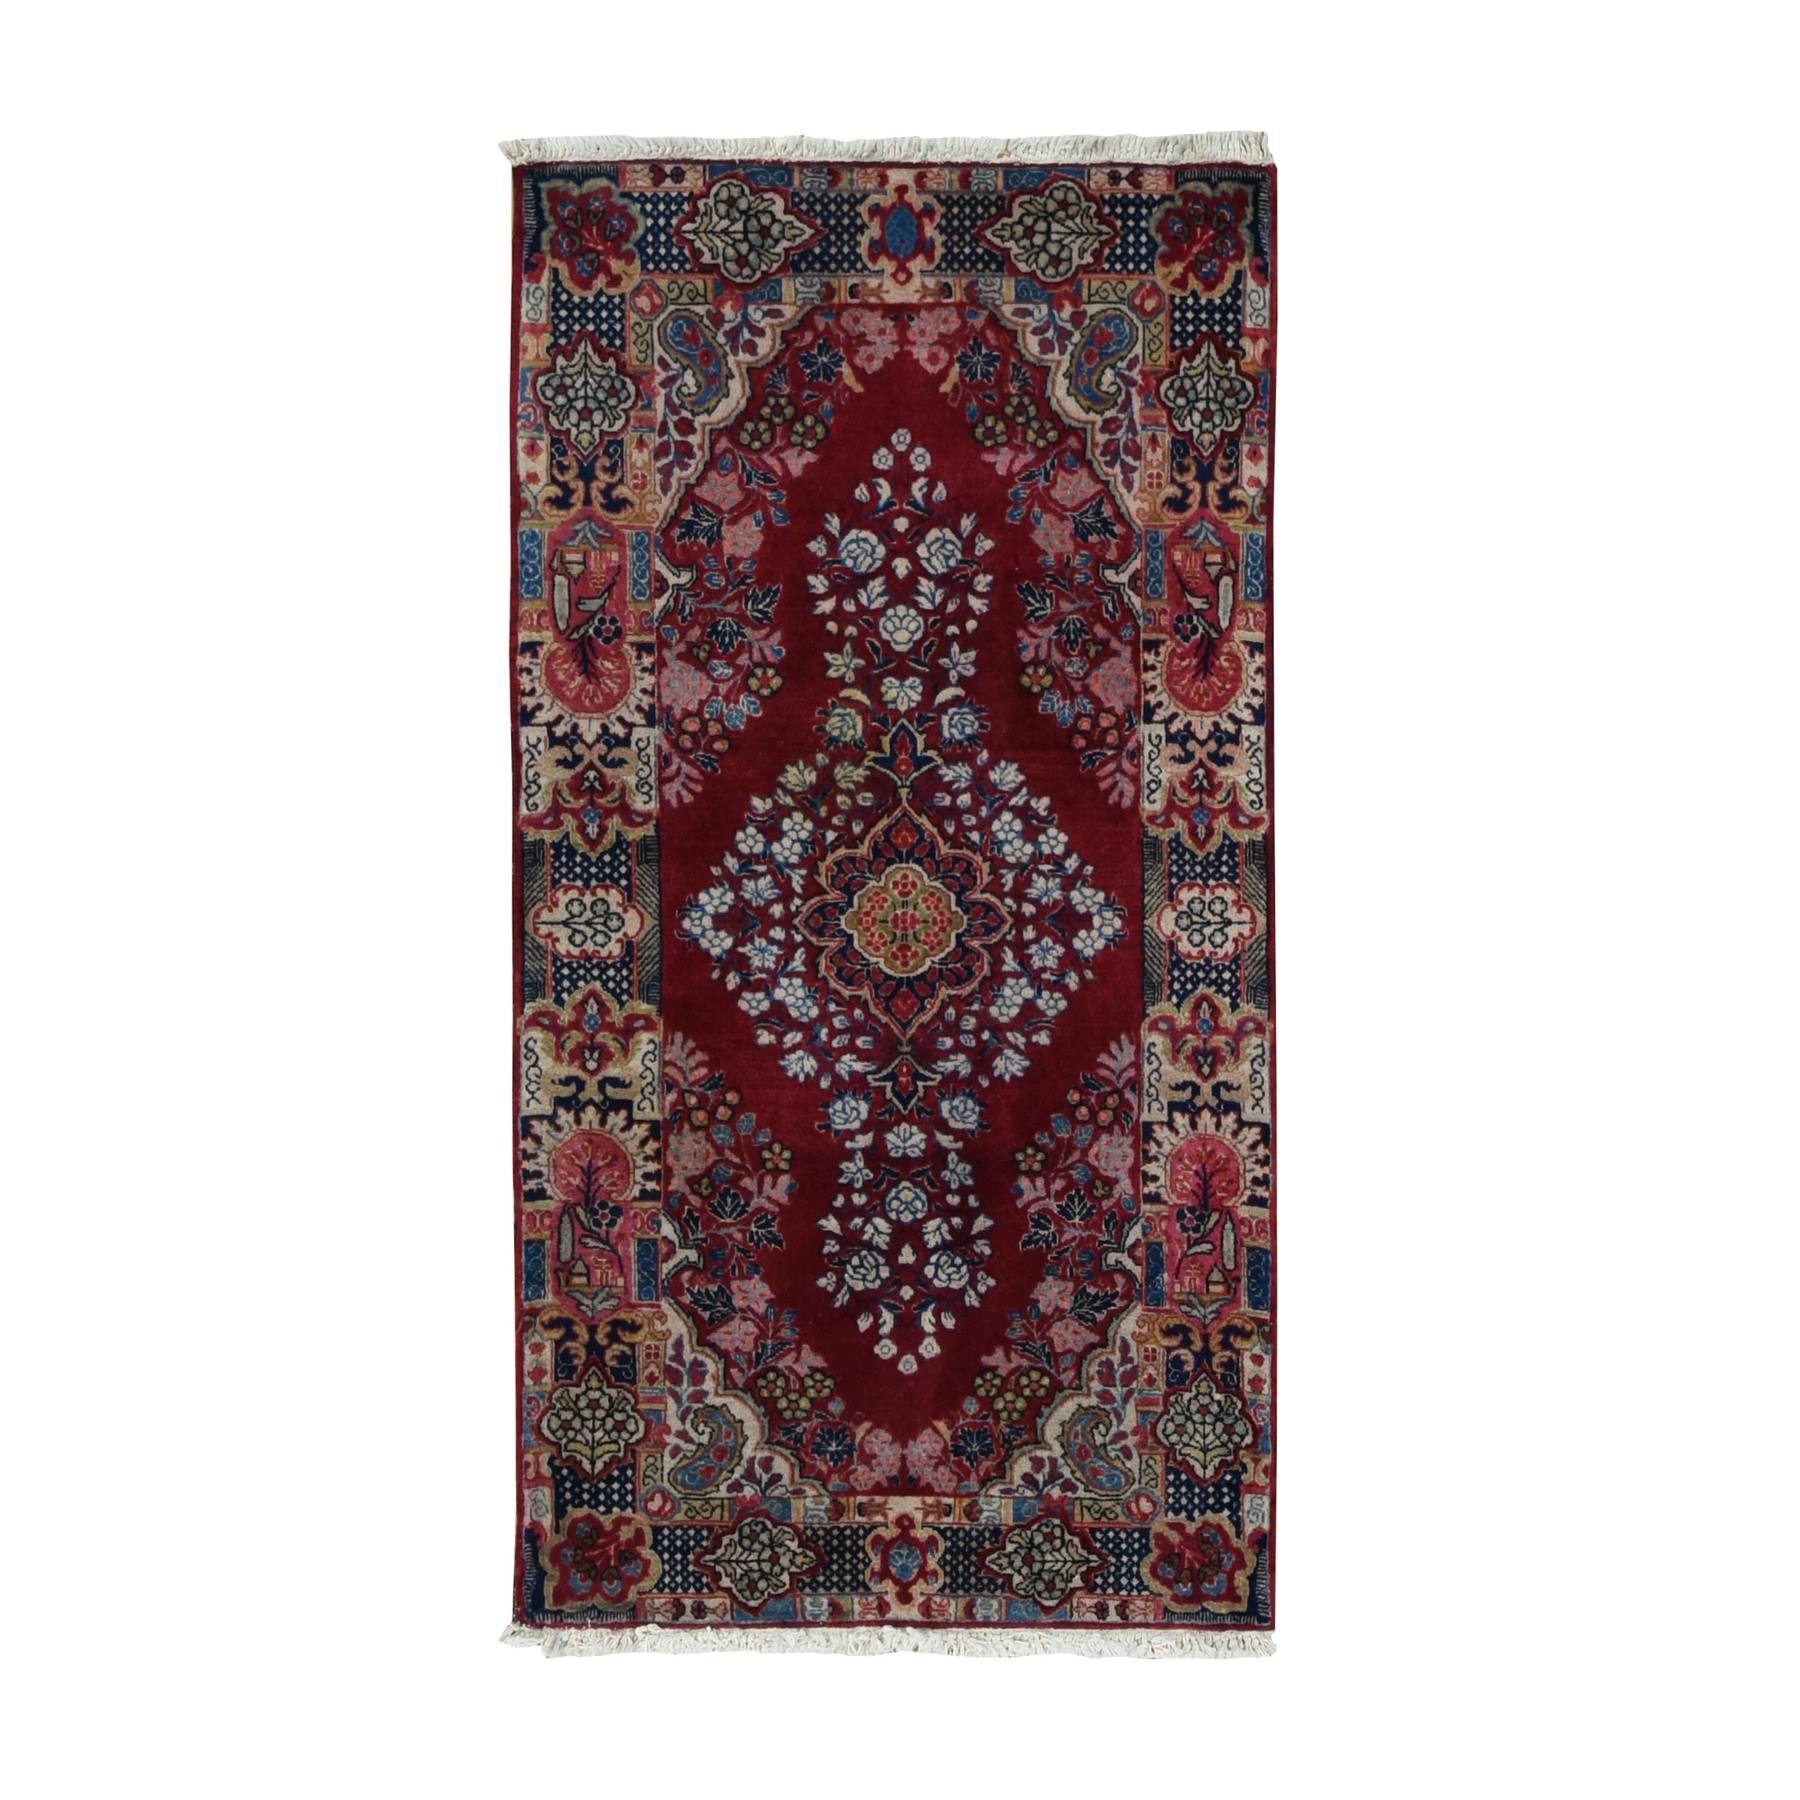 Antique-Hand-Knotted-Rug-390845